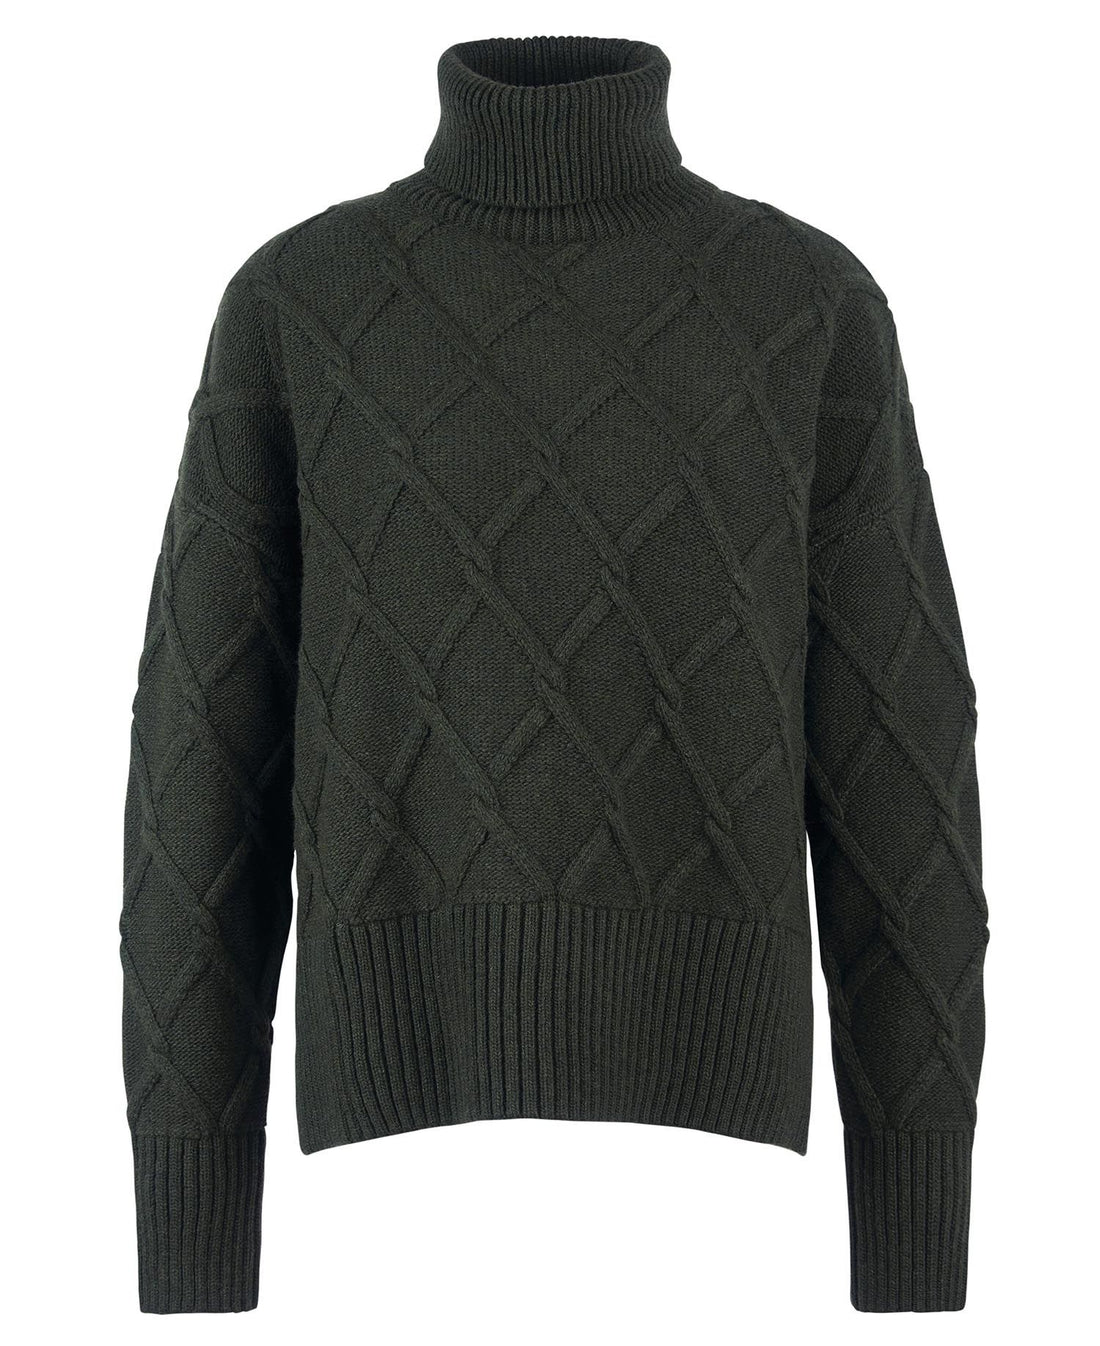 Barbour, Sweater, Perch Knit, Olive